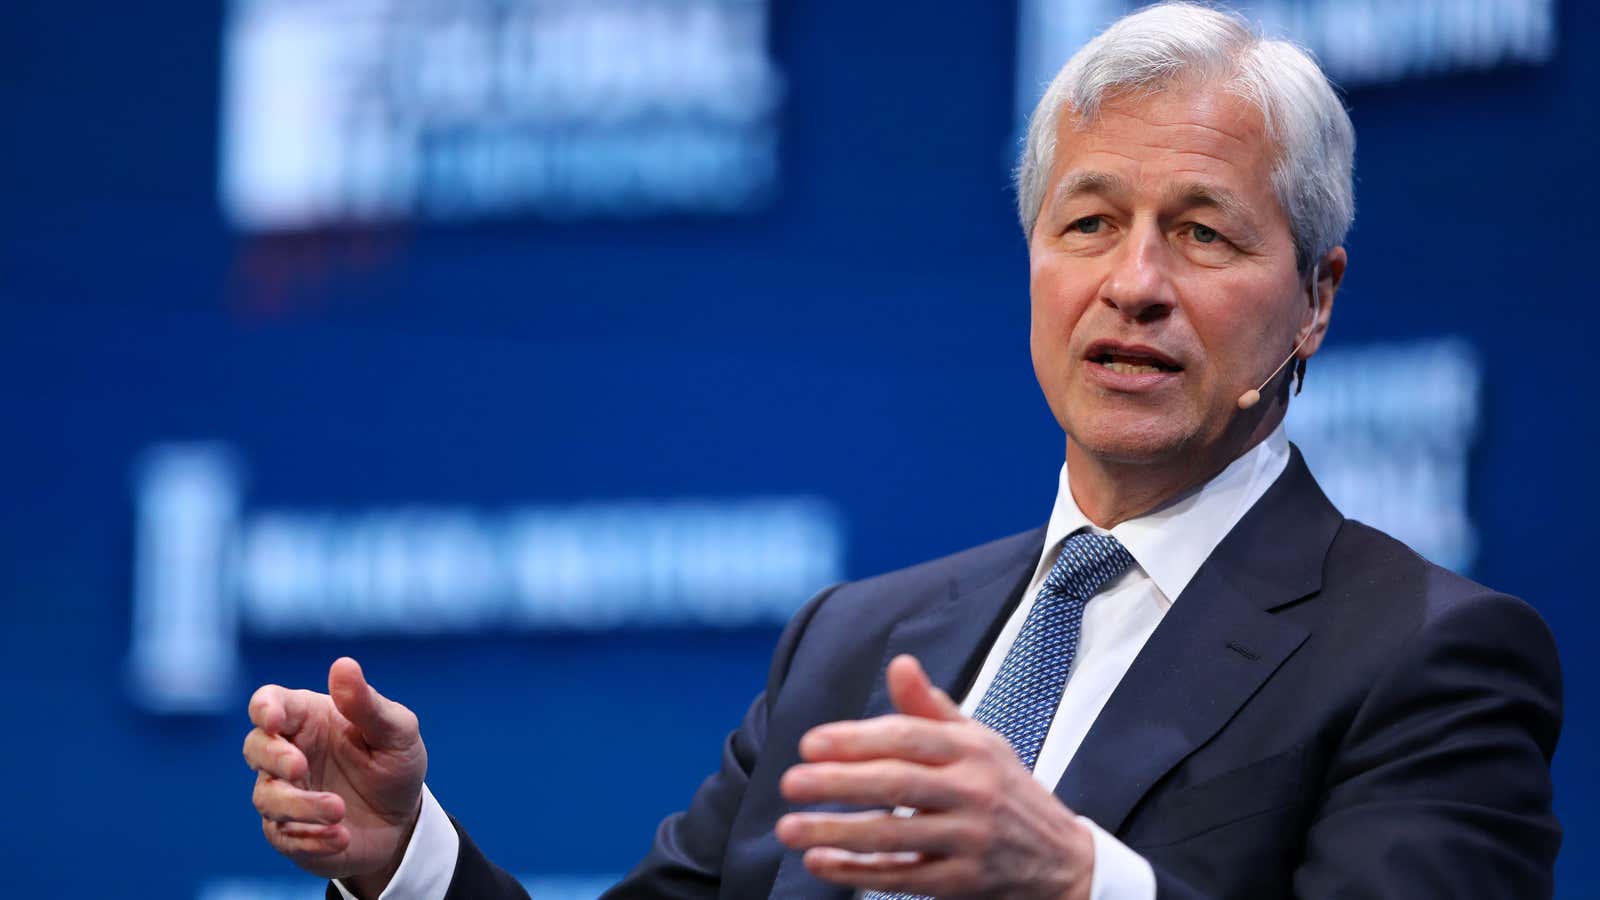 If JPMorgan traders were caught trading bitcoin, they would be fired “in a second” for their “stupidity,” Dimon said.